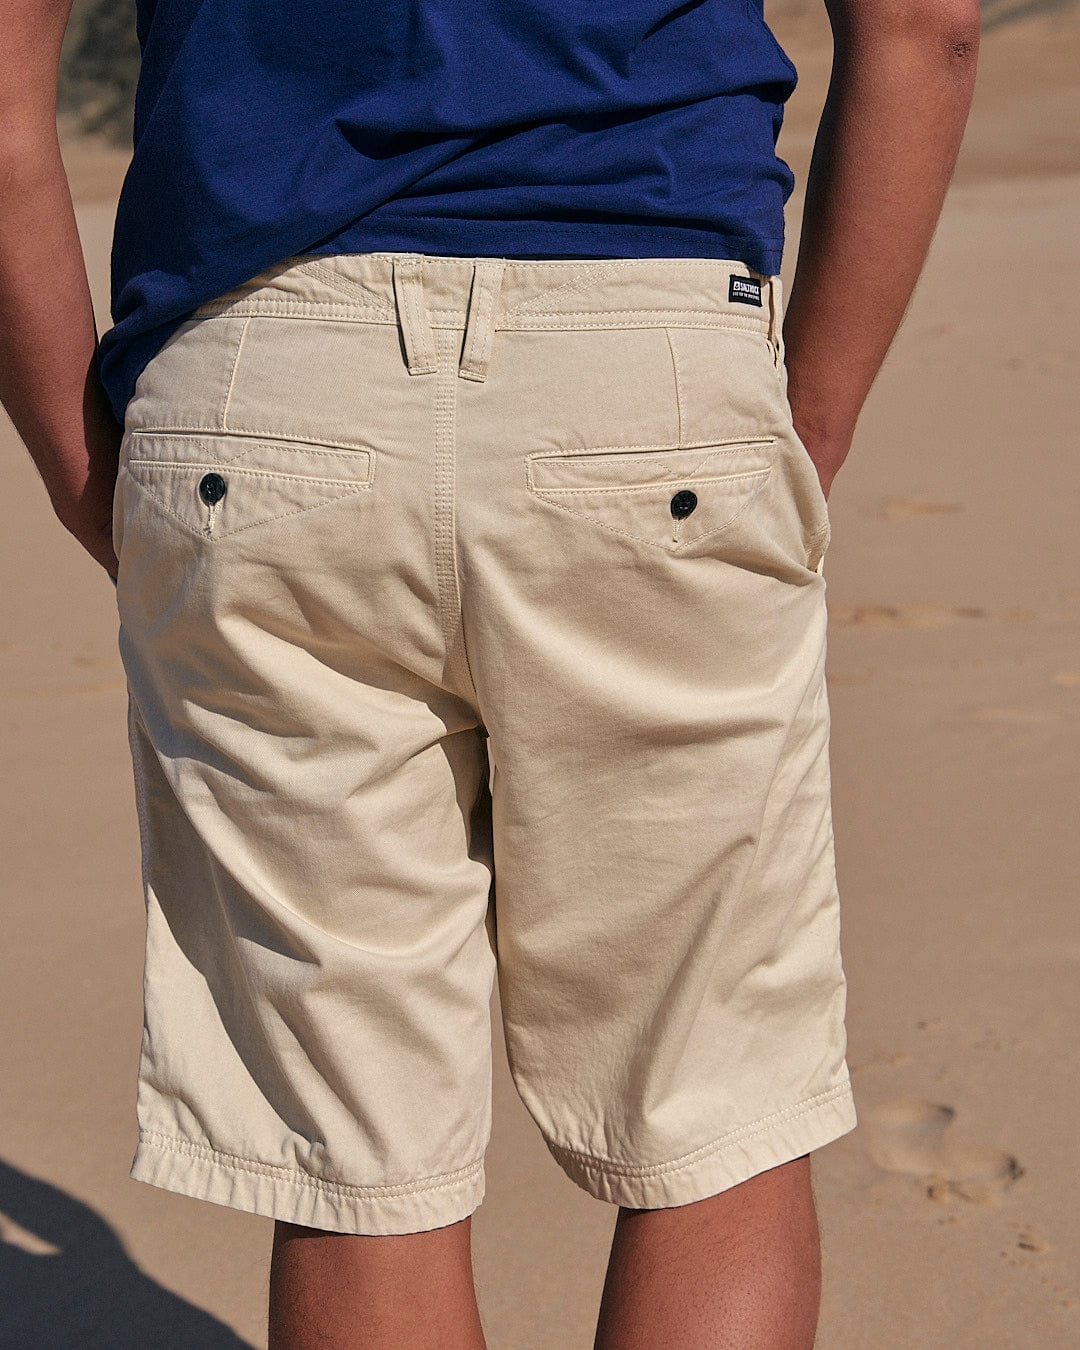 A man standing on a beach wearing Sennen - Mens Chino Shorts in Natural by Saltrock.